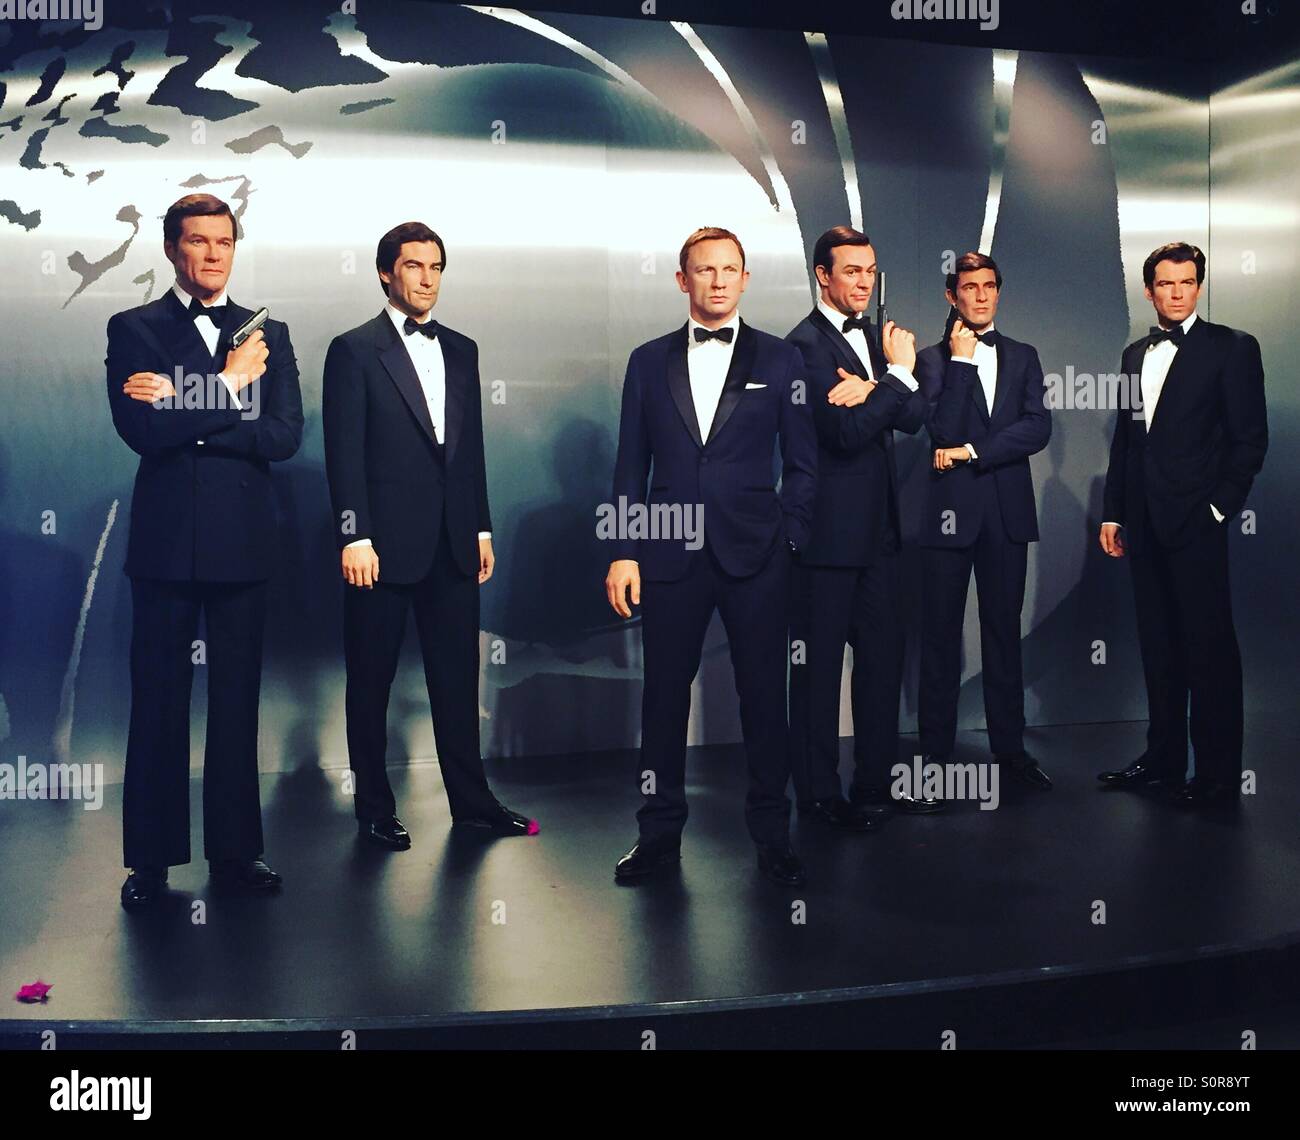 James Bonds in Madame Tussaud's in London. Stock Photo